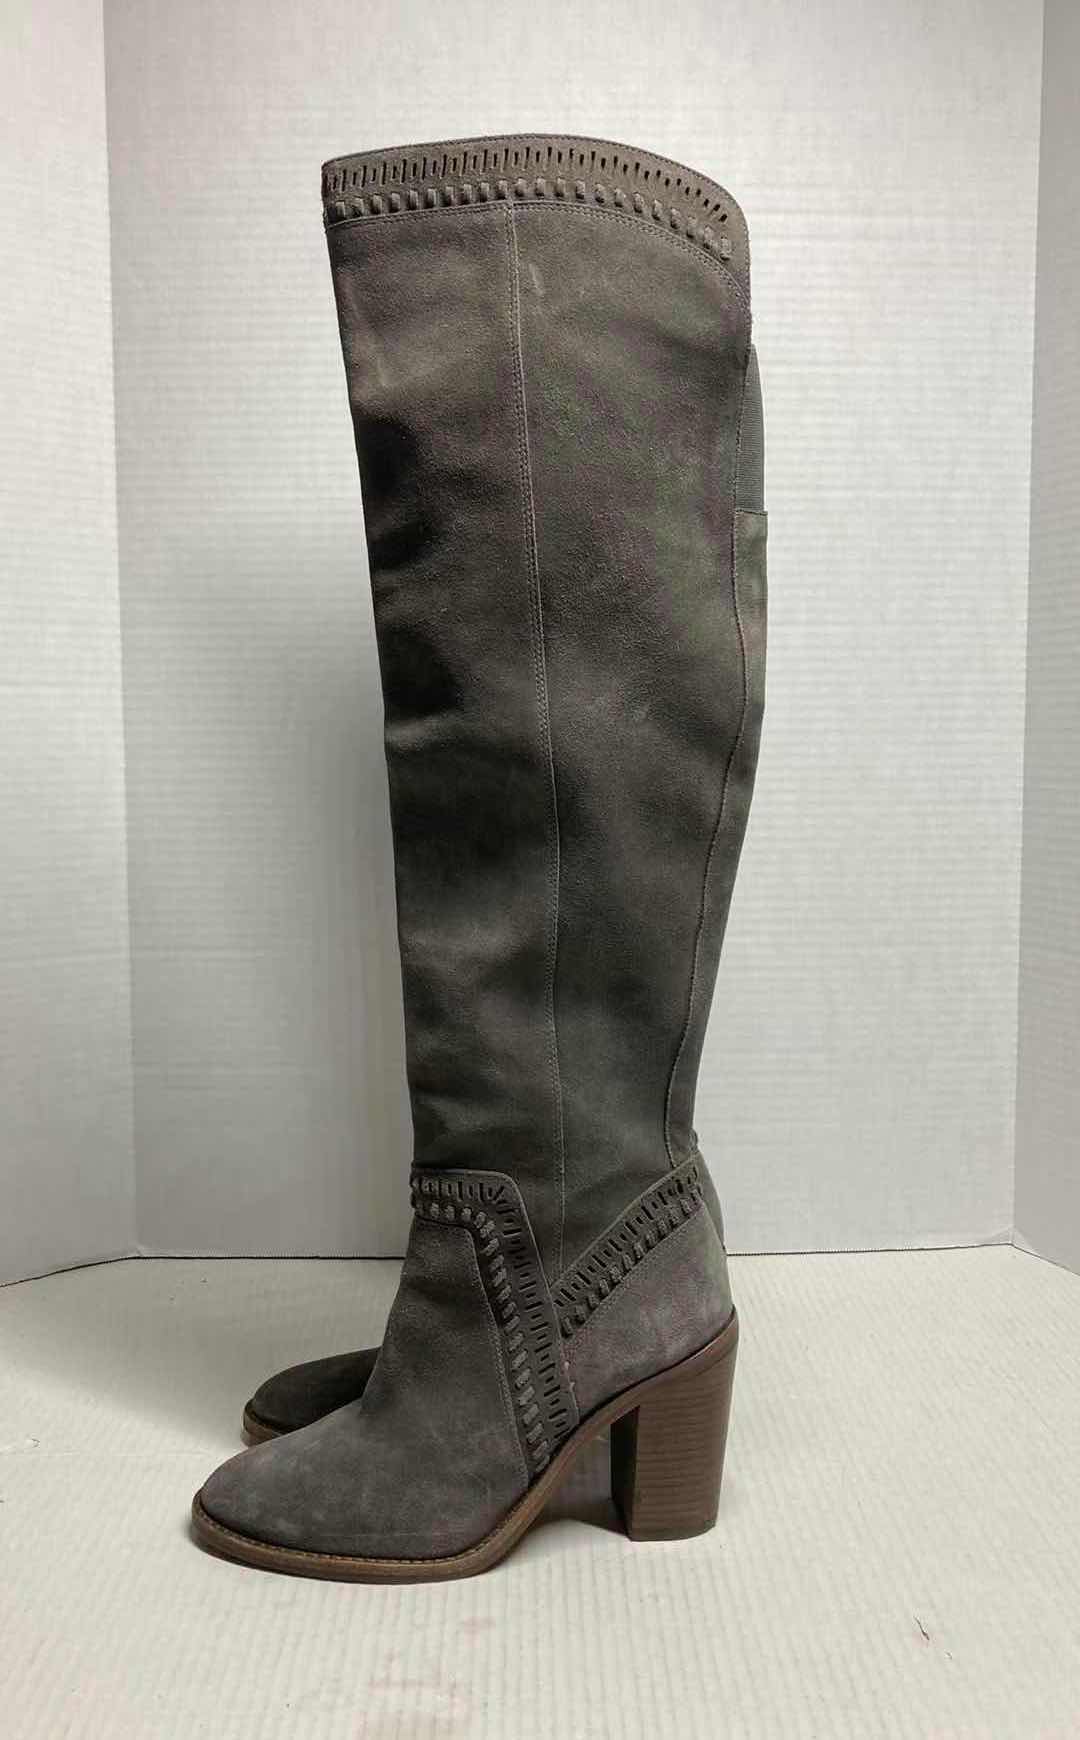 Photo 3 of VINCE CAMUTO BROWN TAUPE SUEDE OVER THE KNEE LEATHER BLOCK HEEL BOOTS WOMAN’S SIZE 9M